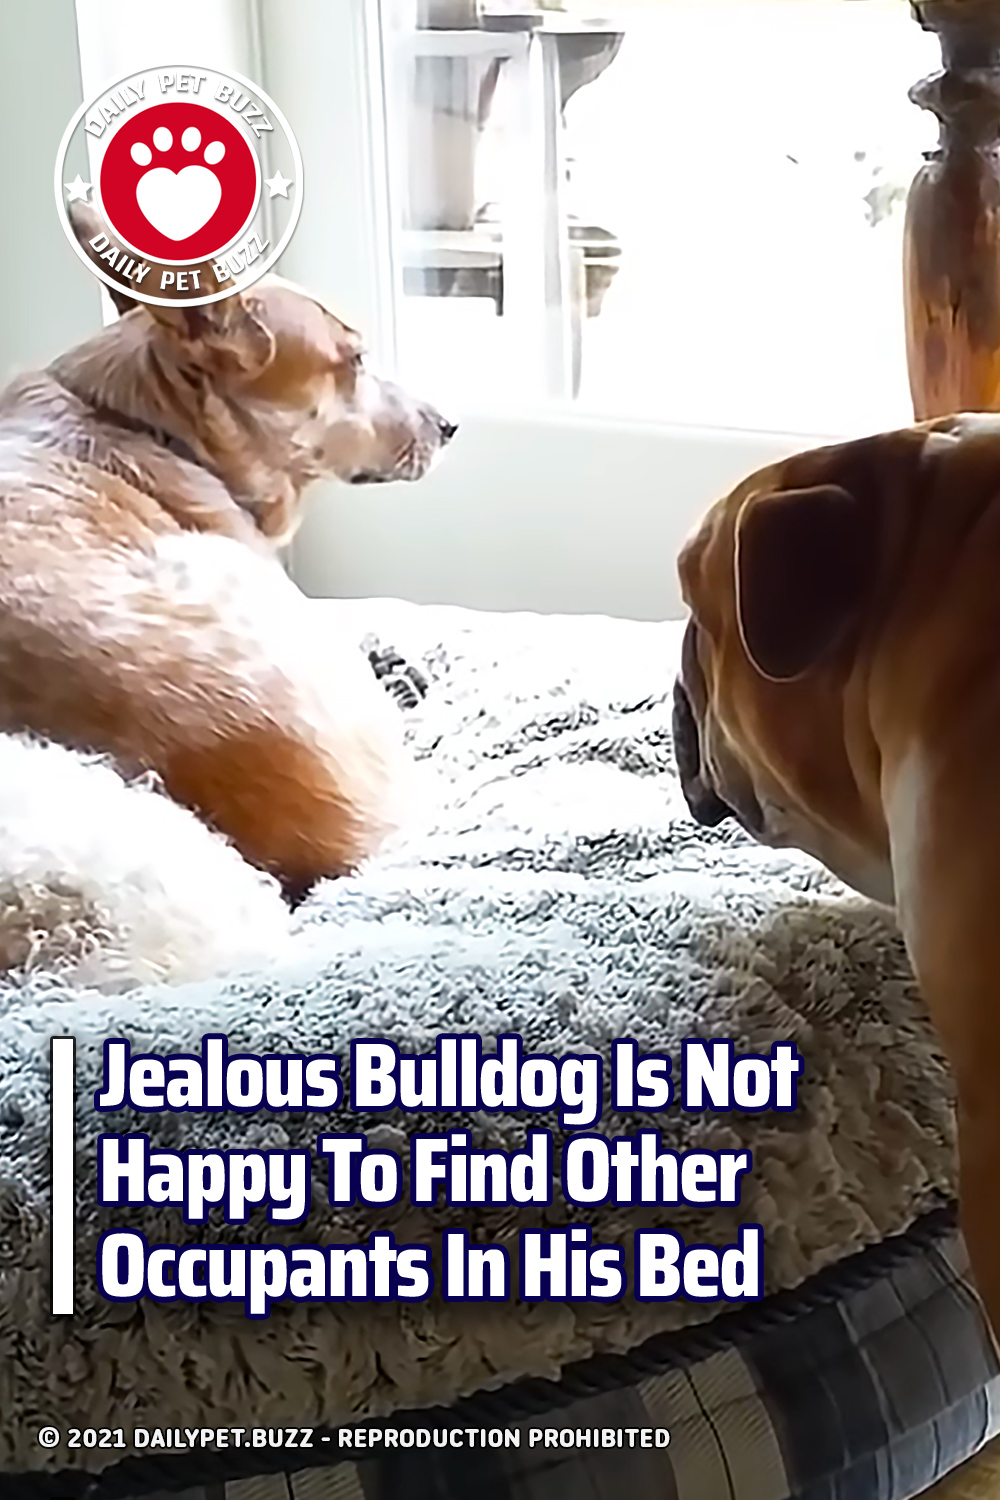 Jealous Bulldog Is Not Happy To Find Other Occupants In His Bed